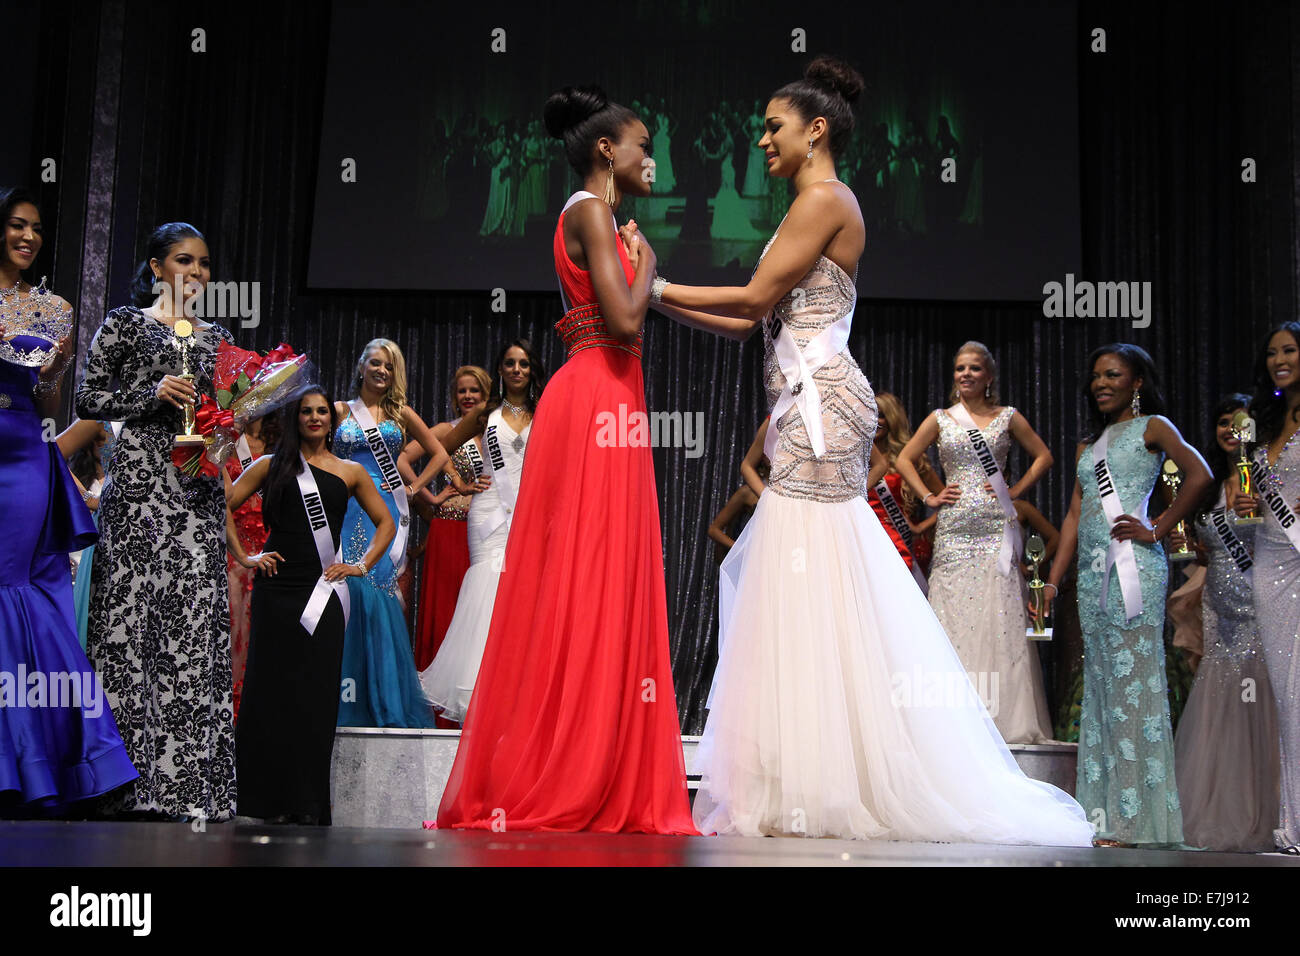 Ariel Diane King Is Crowned Queen Of The Universe At The Queen Of The Universe International